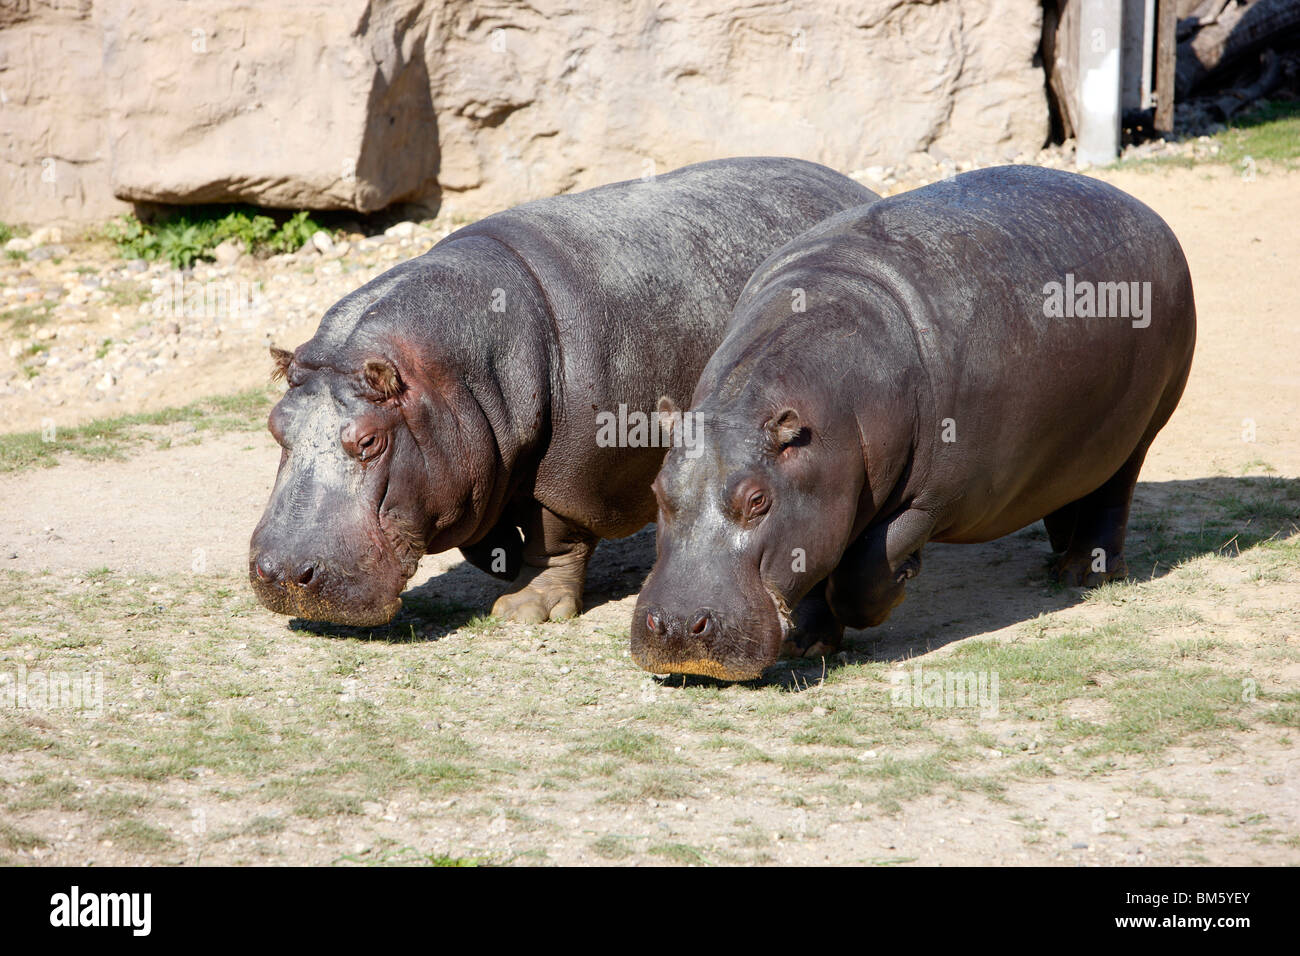 Hippo in a zoo. Stock Photo